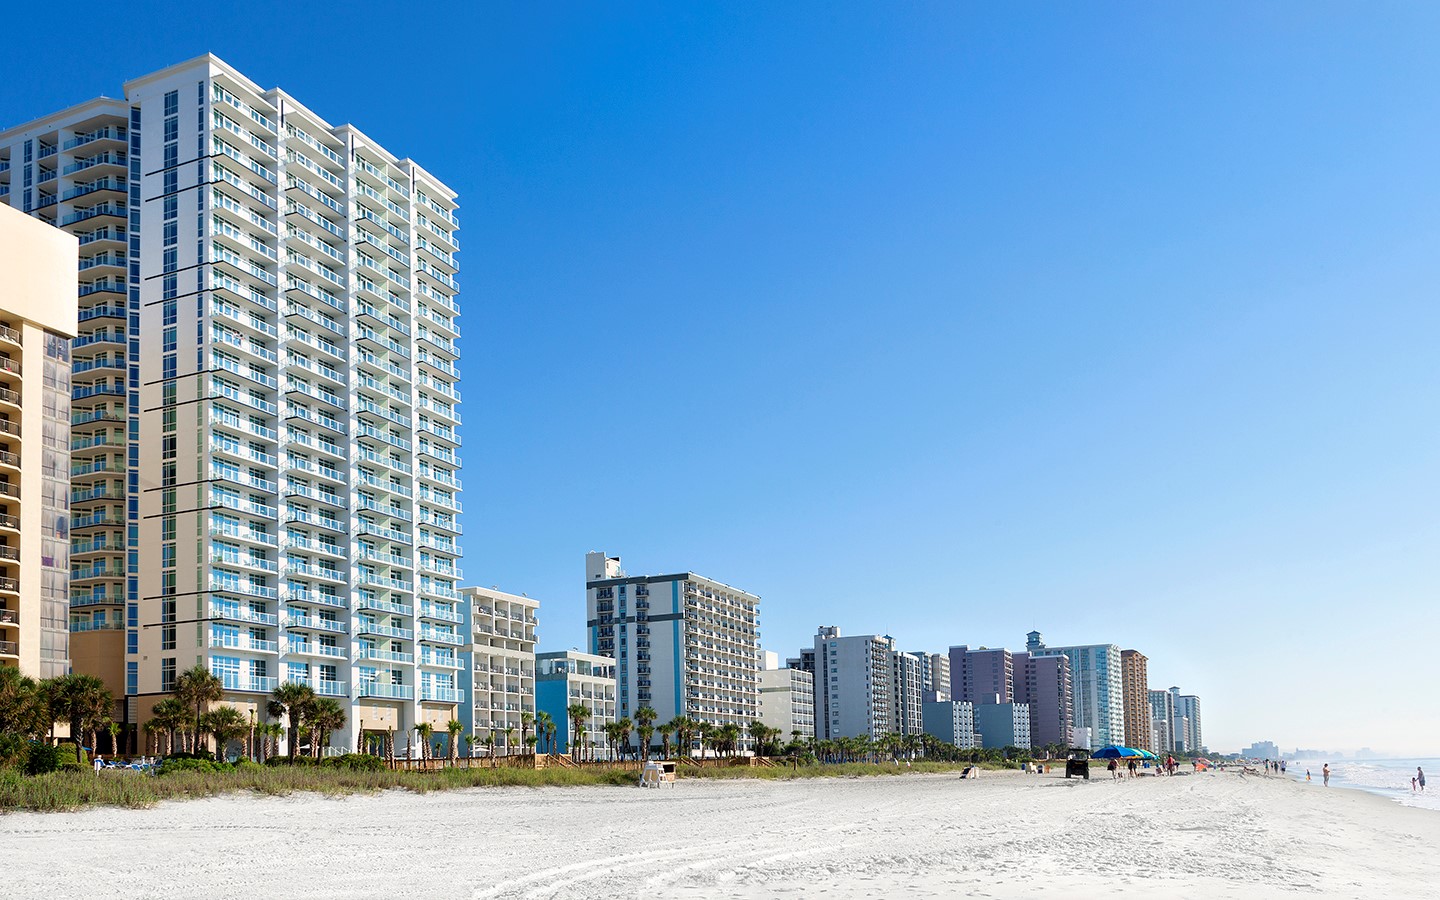 Hilton Grand Vacations  Whats New at Myrtle Beach in 2020